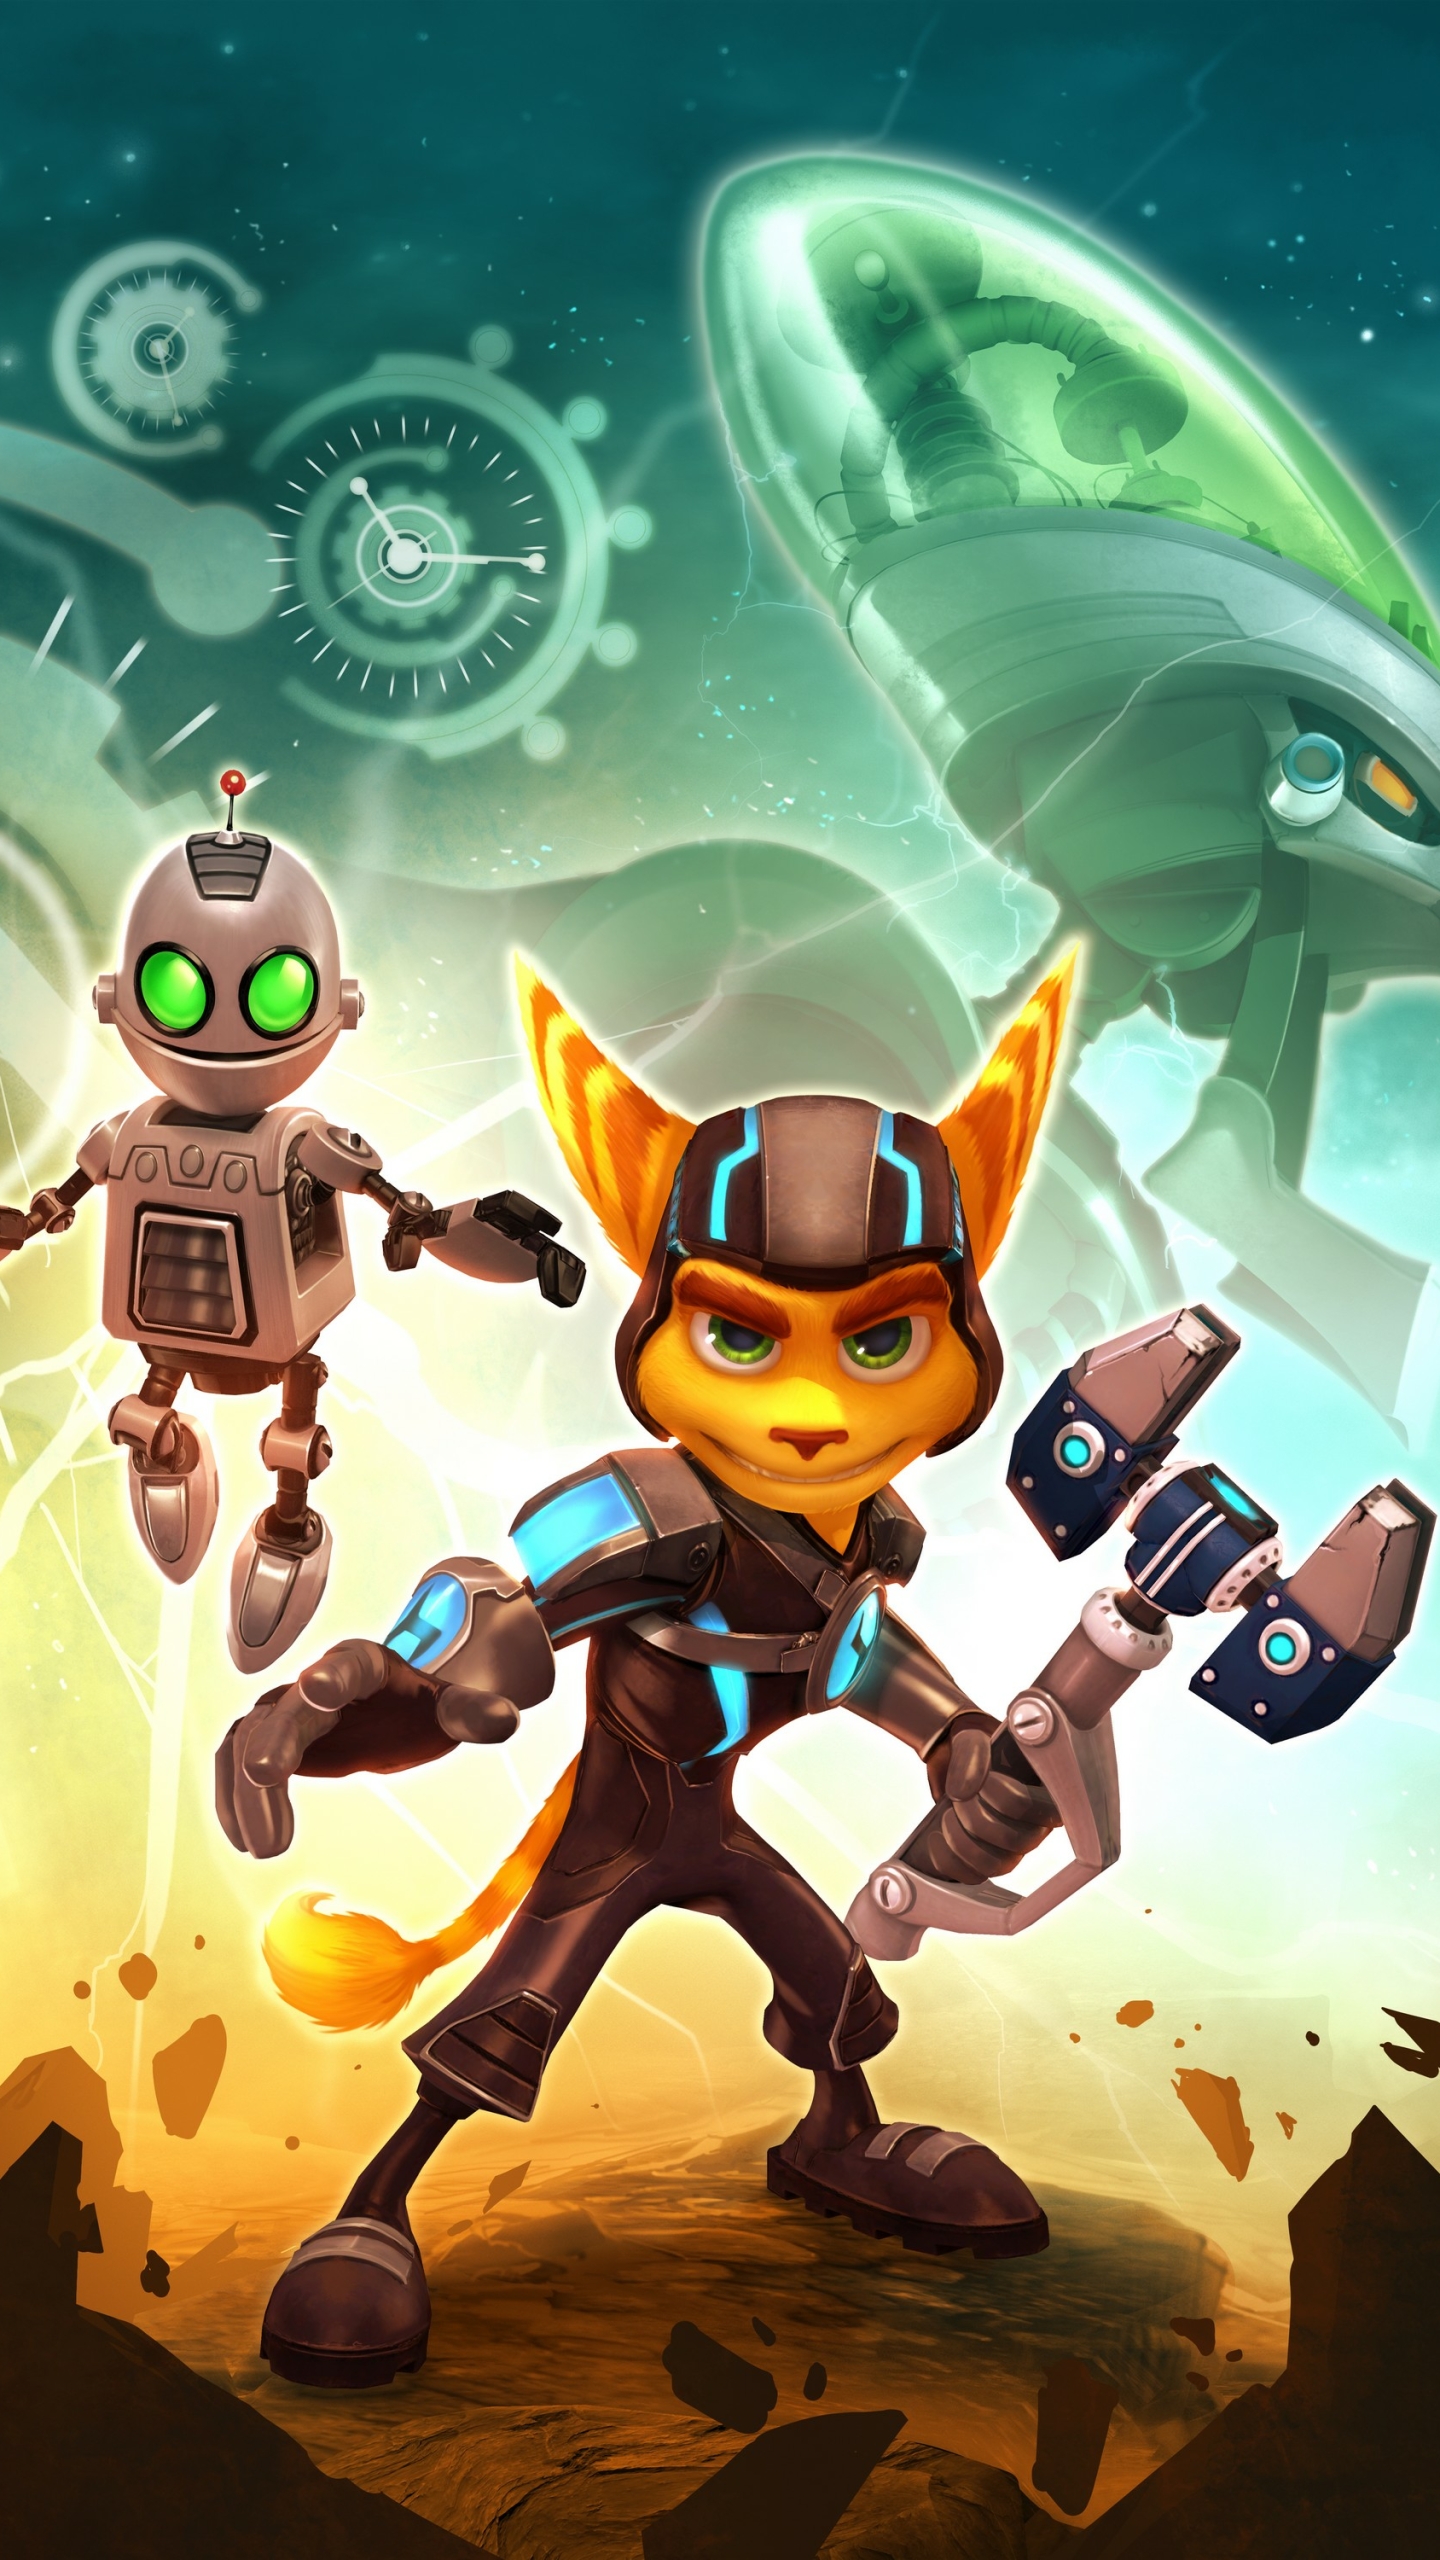 ratchet & clank, video game, ratchet & clank future: a crack in time